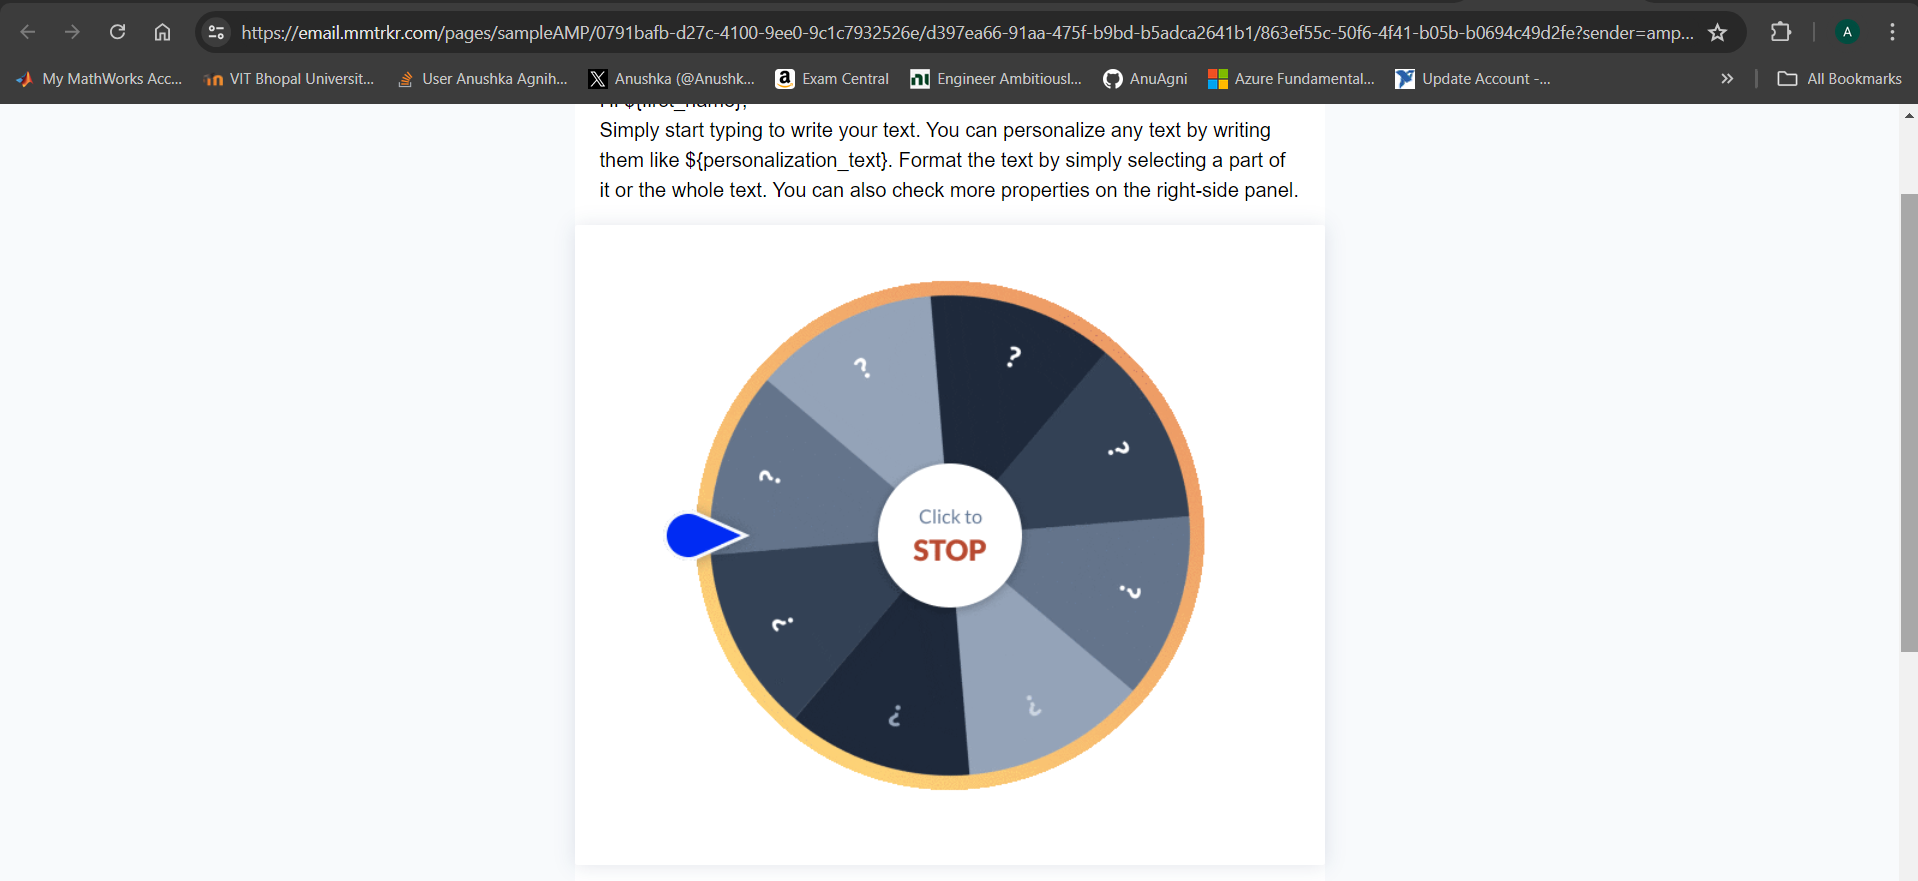 How to use Spin the Wheel widget in the editor for your campaigns?